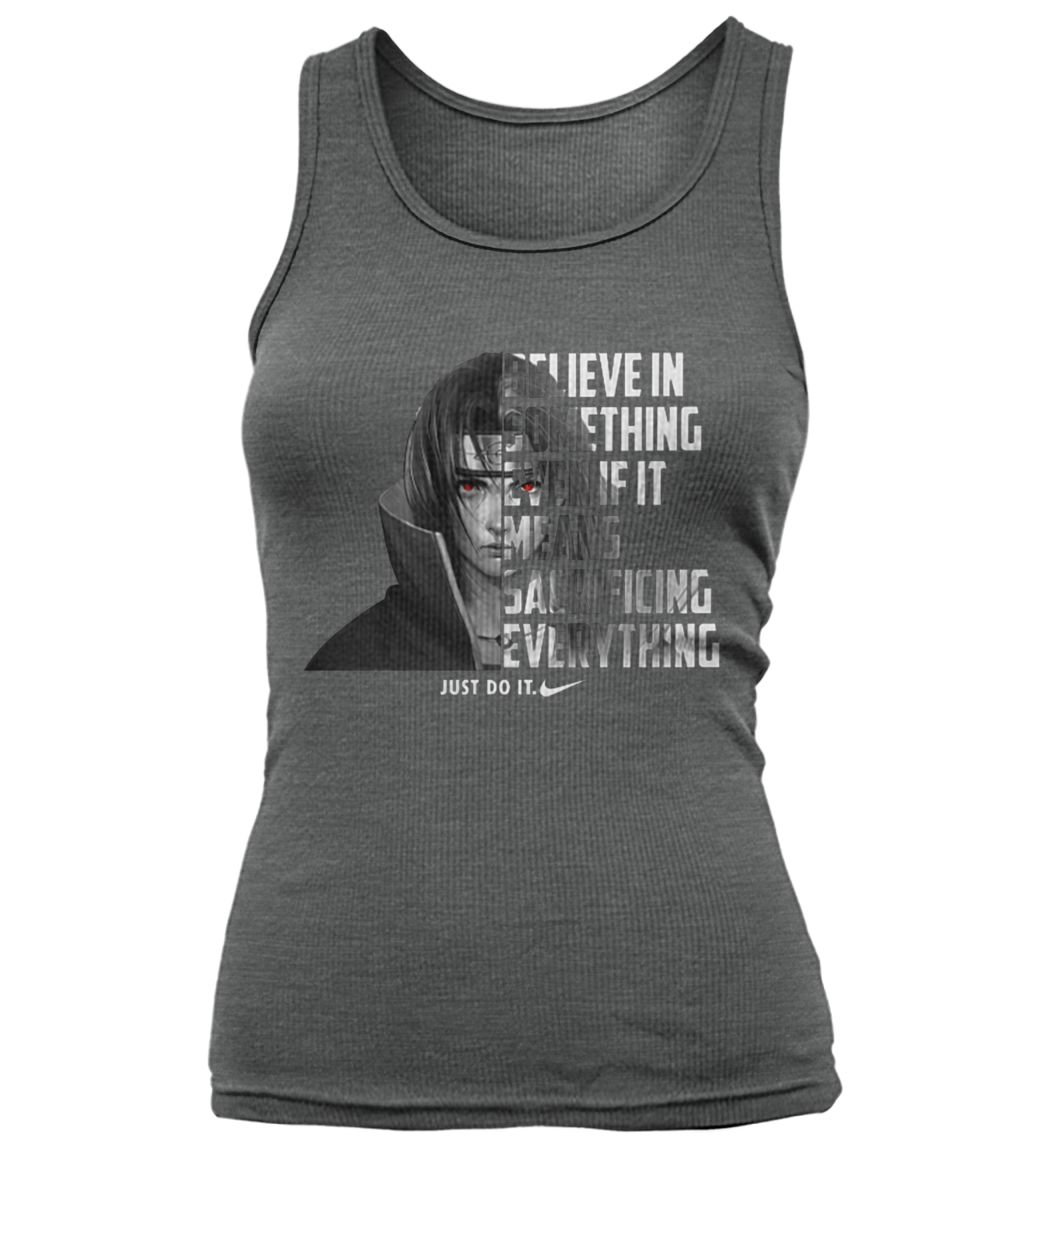 Sasuke Uchiha believe in something even if it means sacrificing everything just do it women's tank top